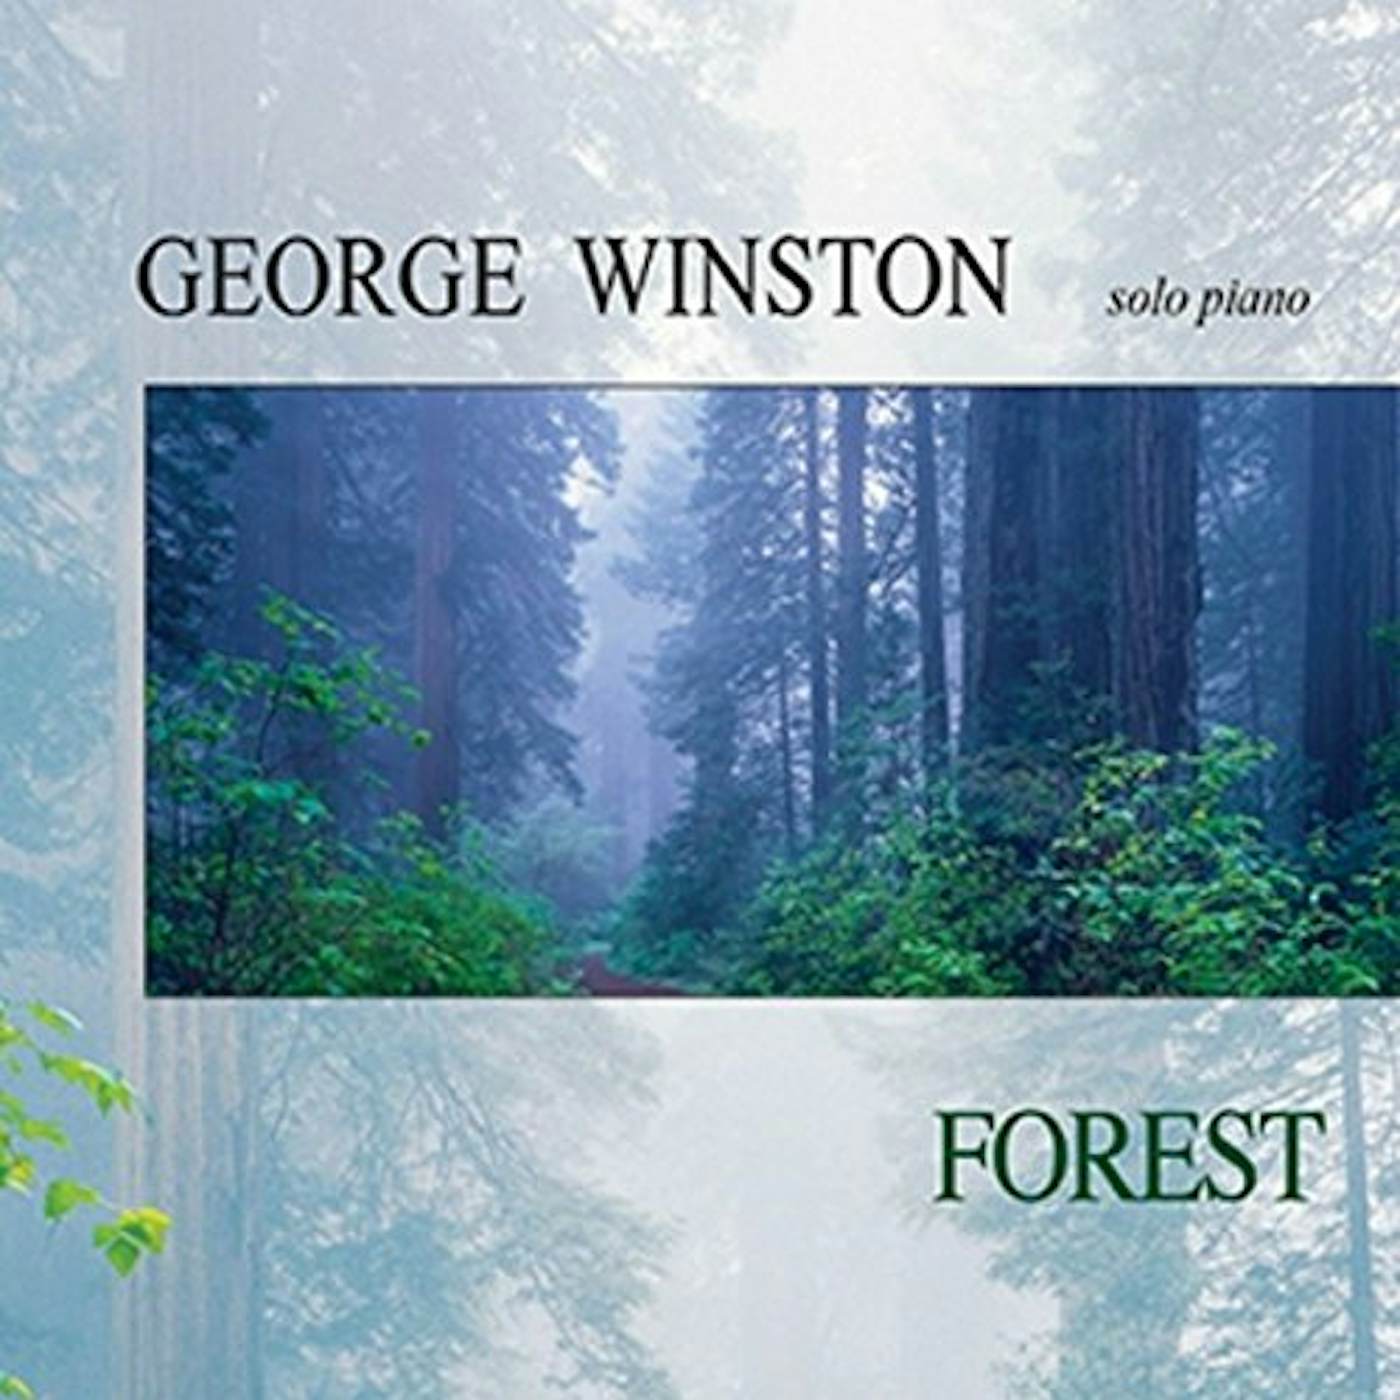 George Winston FOREST CD